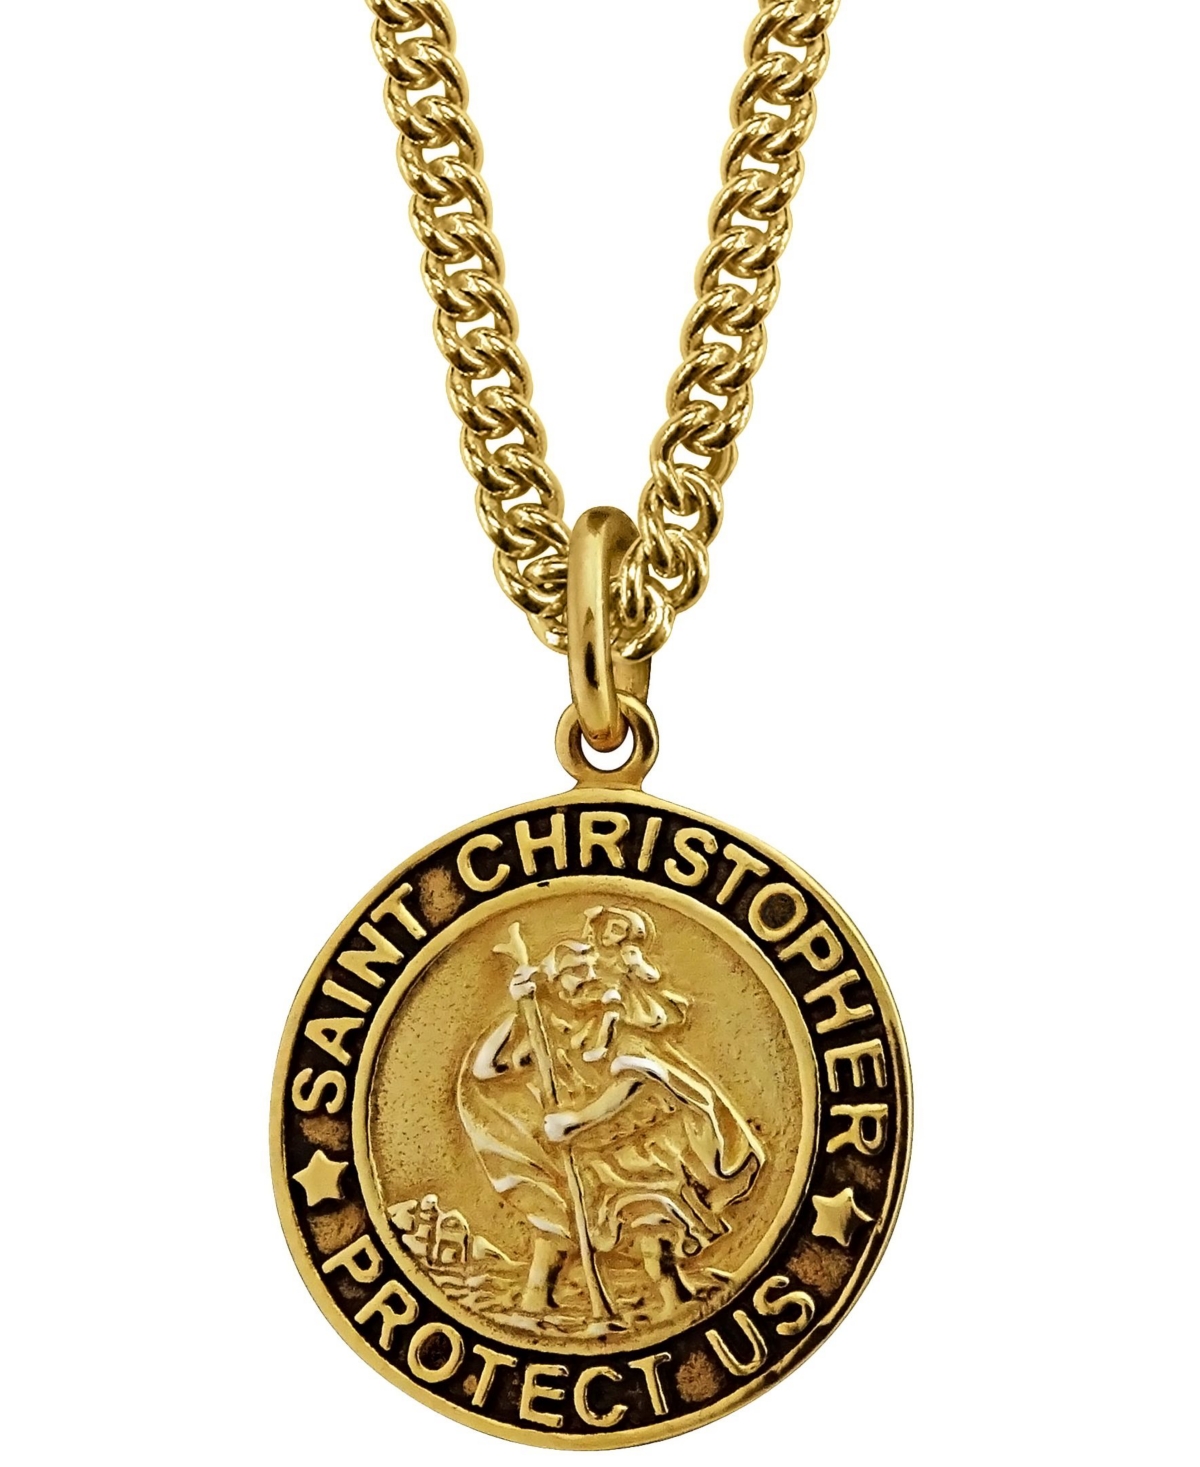 Sutton Gold Plated Sterling Silver Saint Christopher Pendant Necklace - Gold